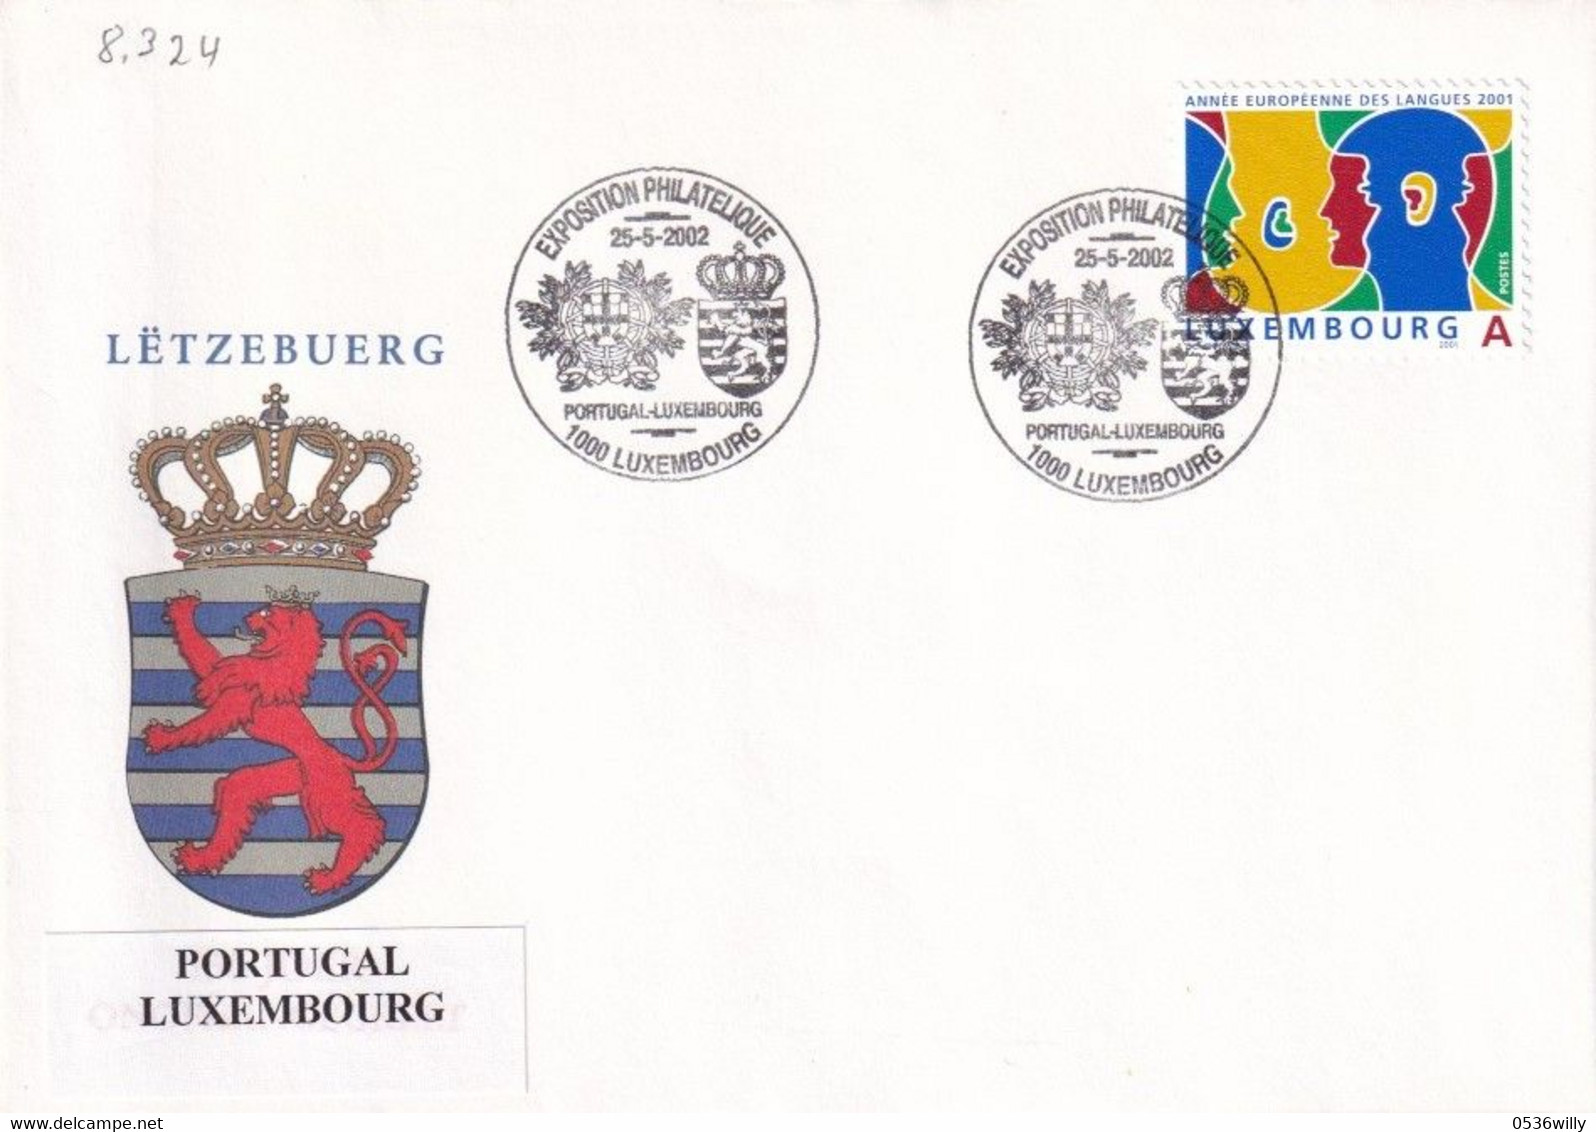 Luxembourg - Expo Phil. Portugal-Luxembourg (8.324) - Covers & Documents